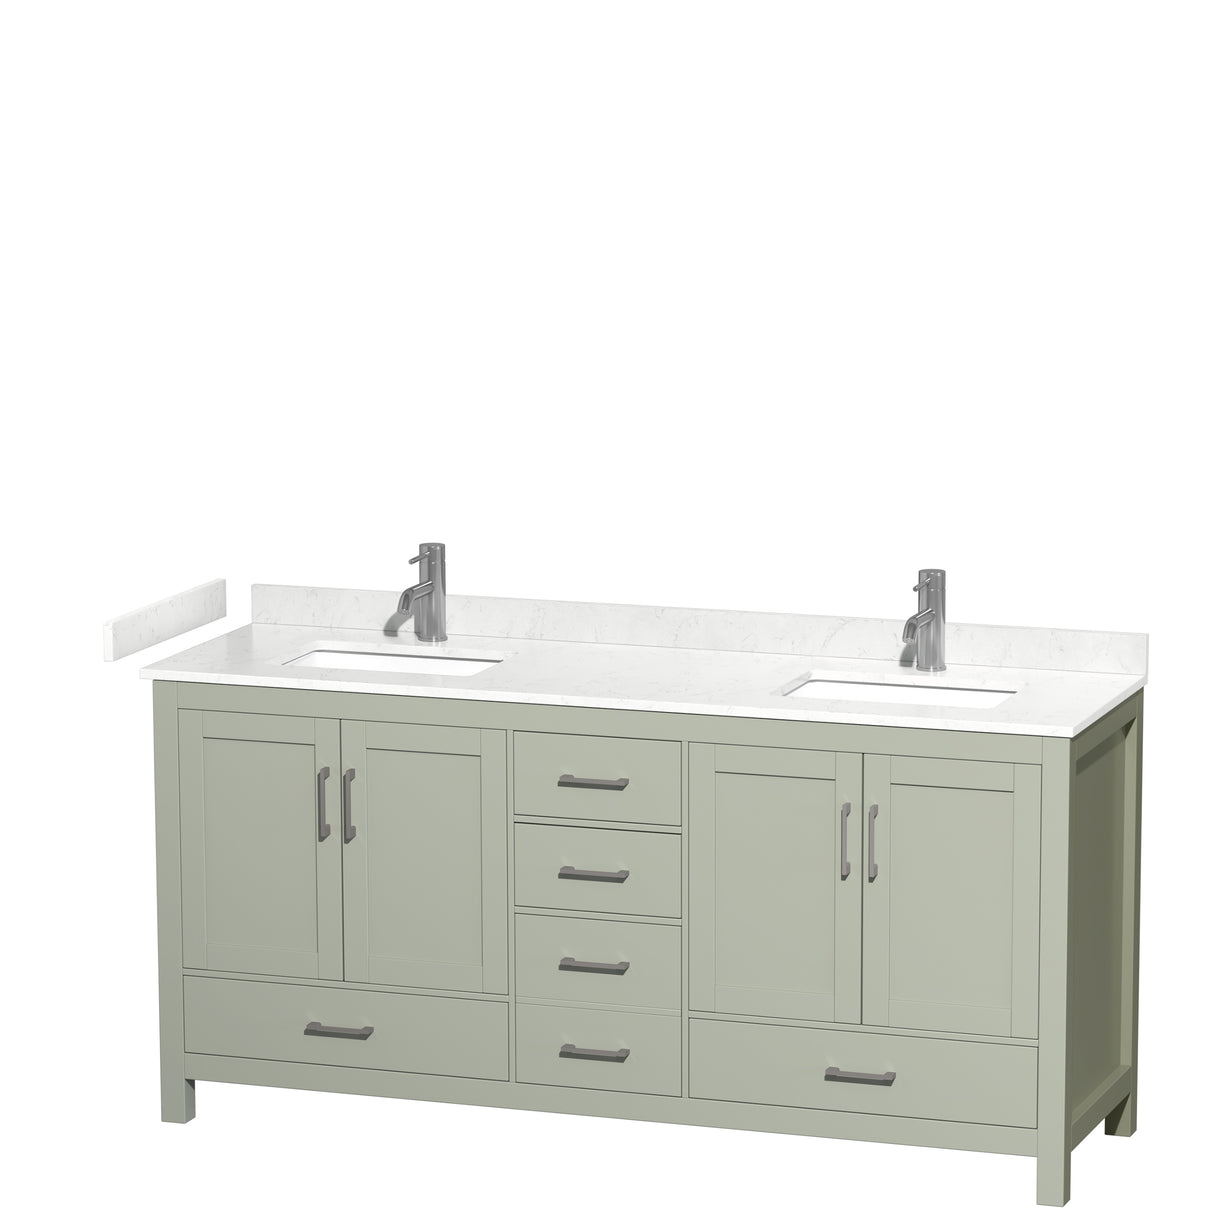 Sheffield 72 inch Double Bathroom Vanity in Light Green Carrara Cultured Marble Countertop Undermount Square Sinks Brushed Nickel Trim